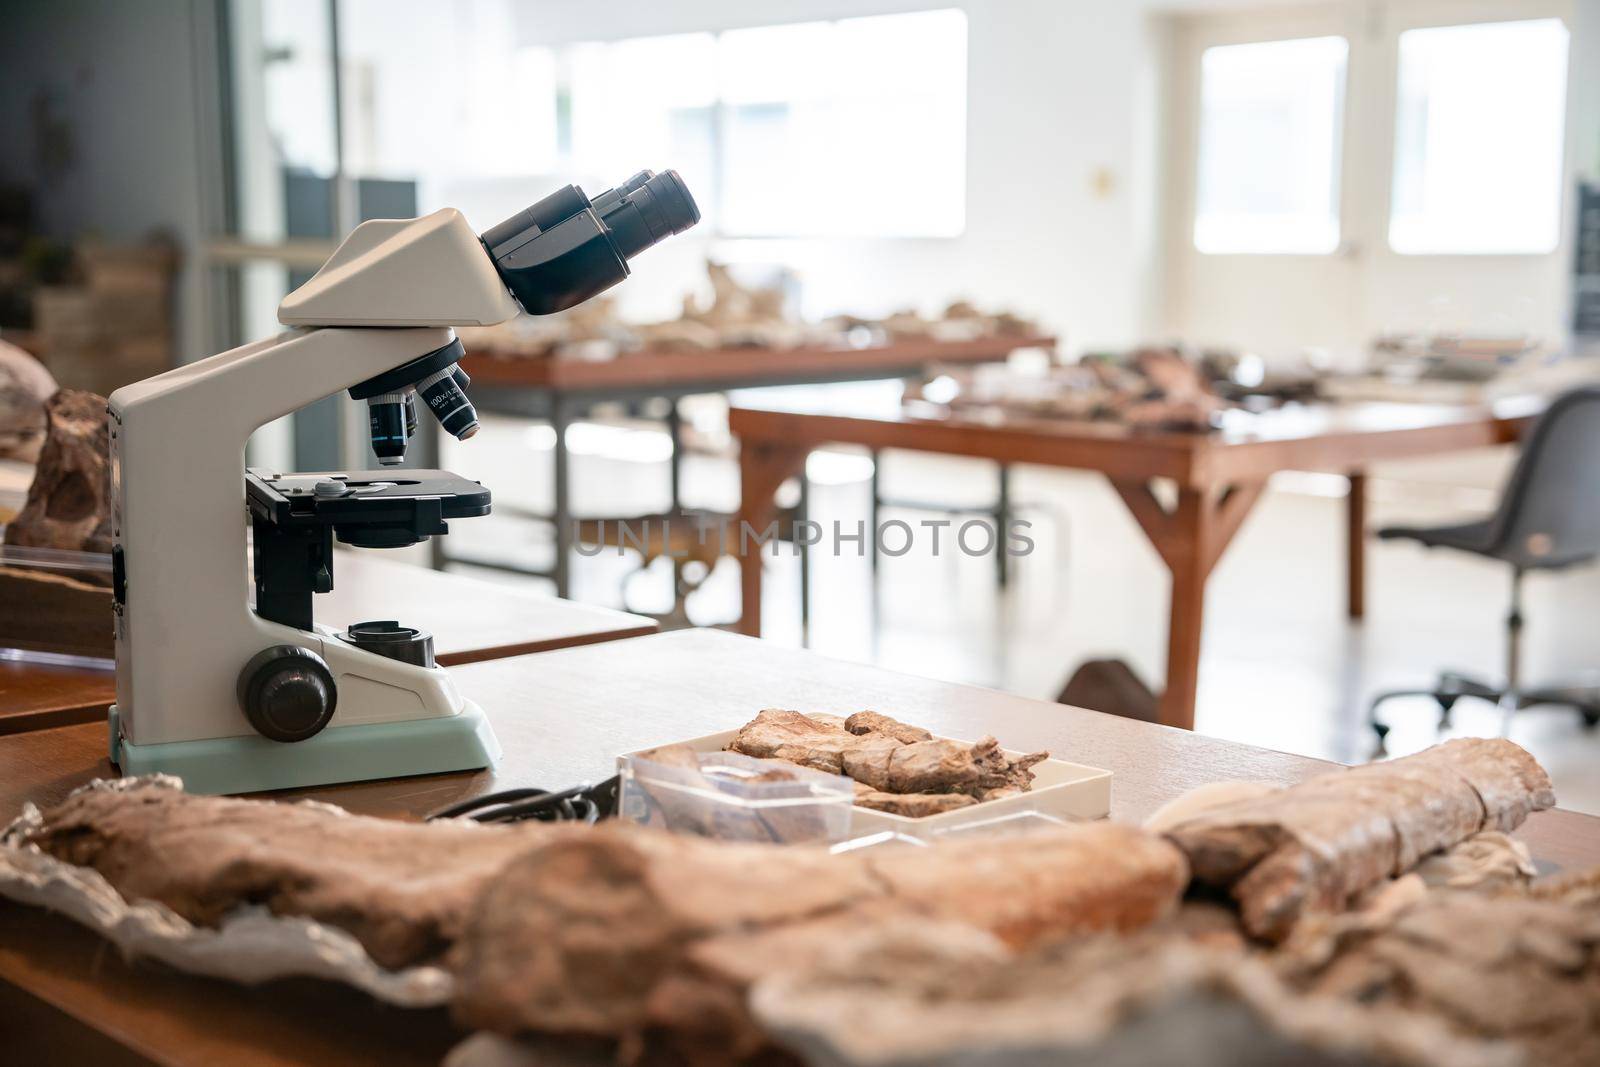 Archeologists tools cleaning Dinosaur Skeleton, Discover Fossil Remains of New Species.